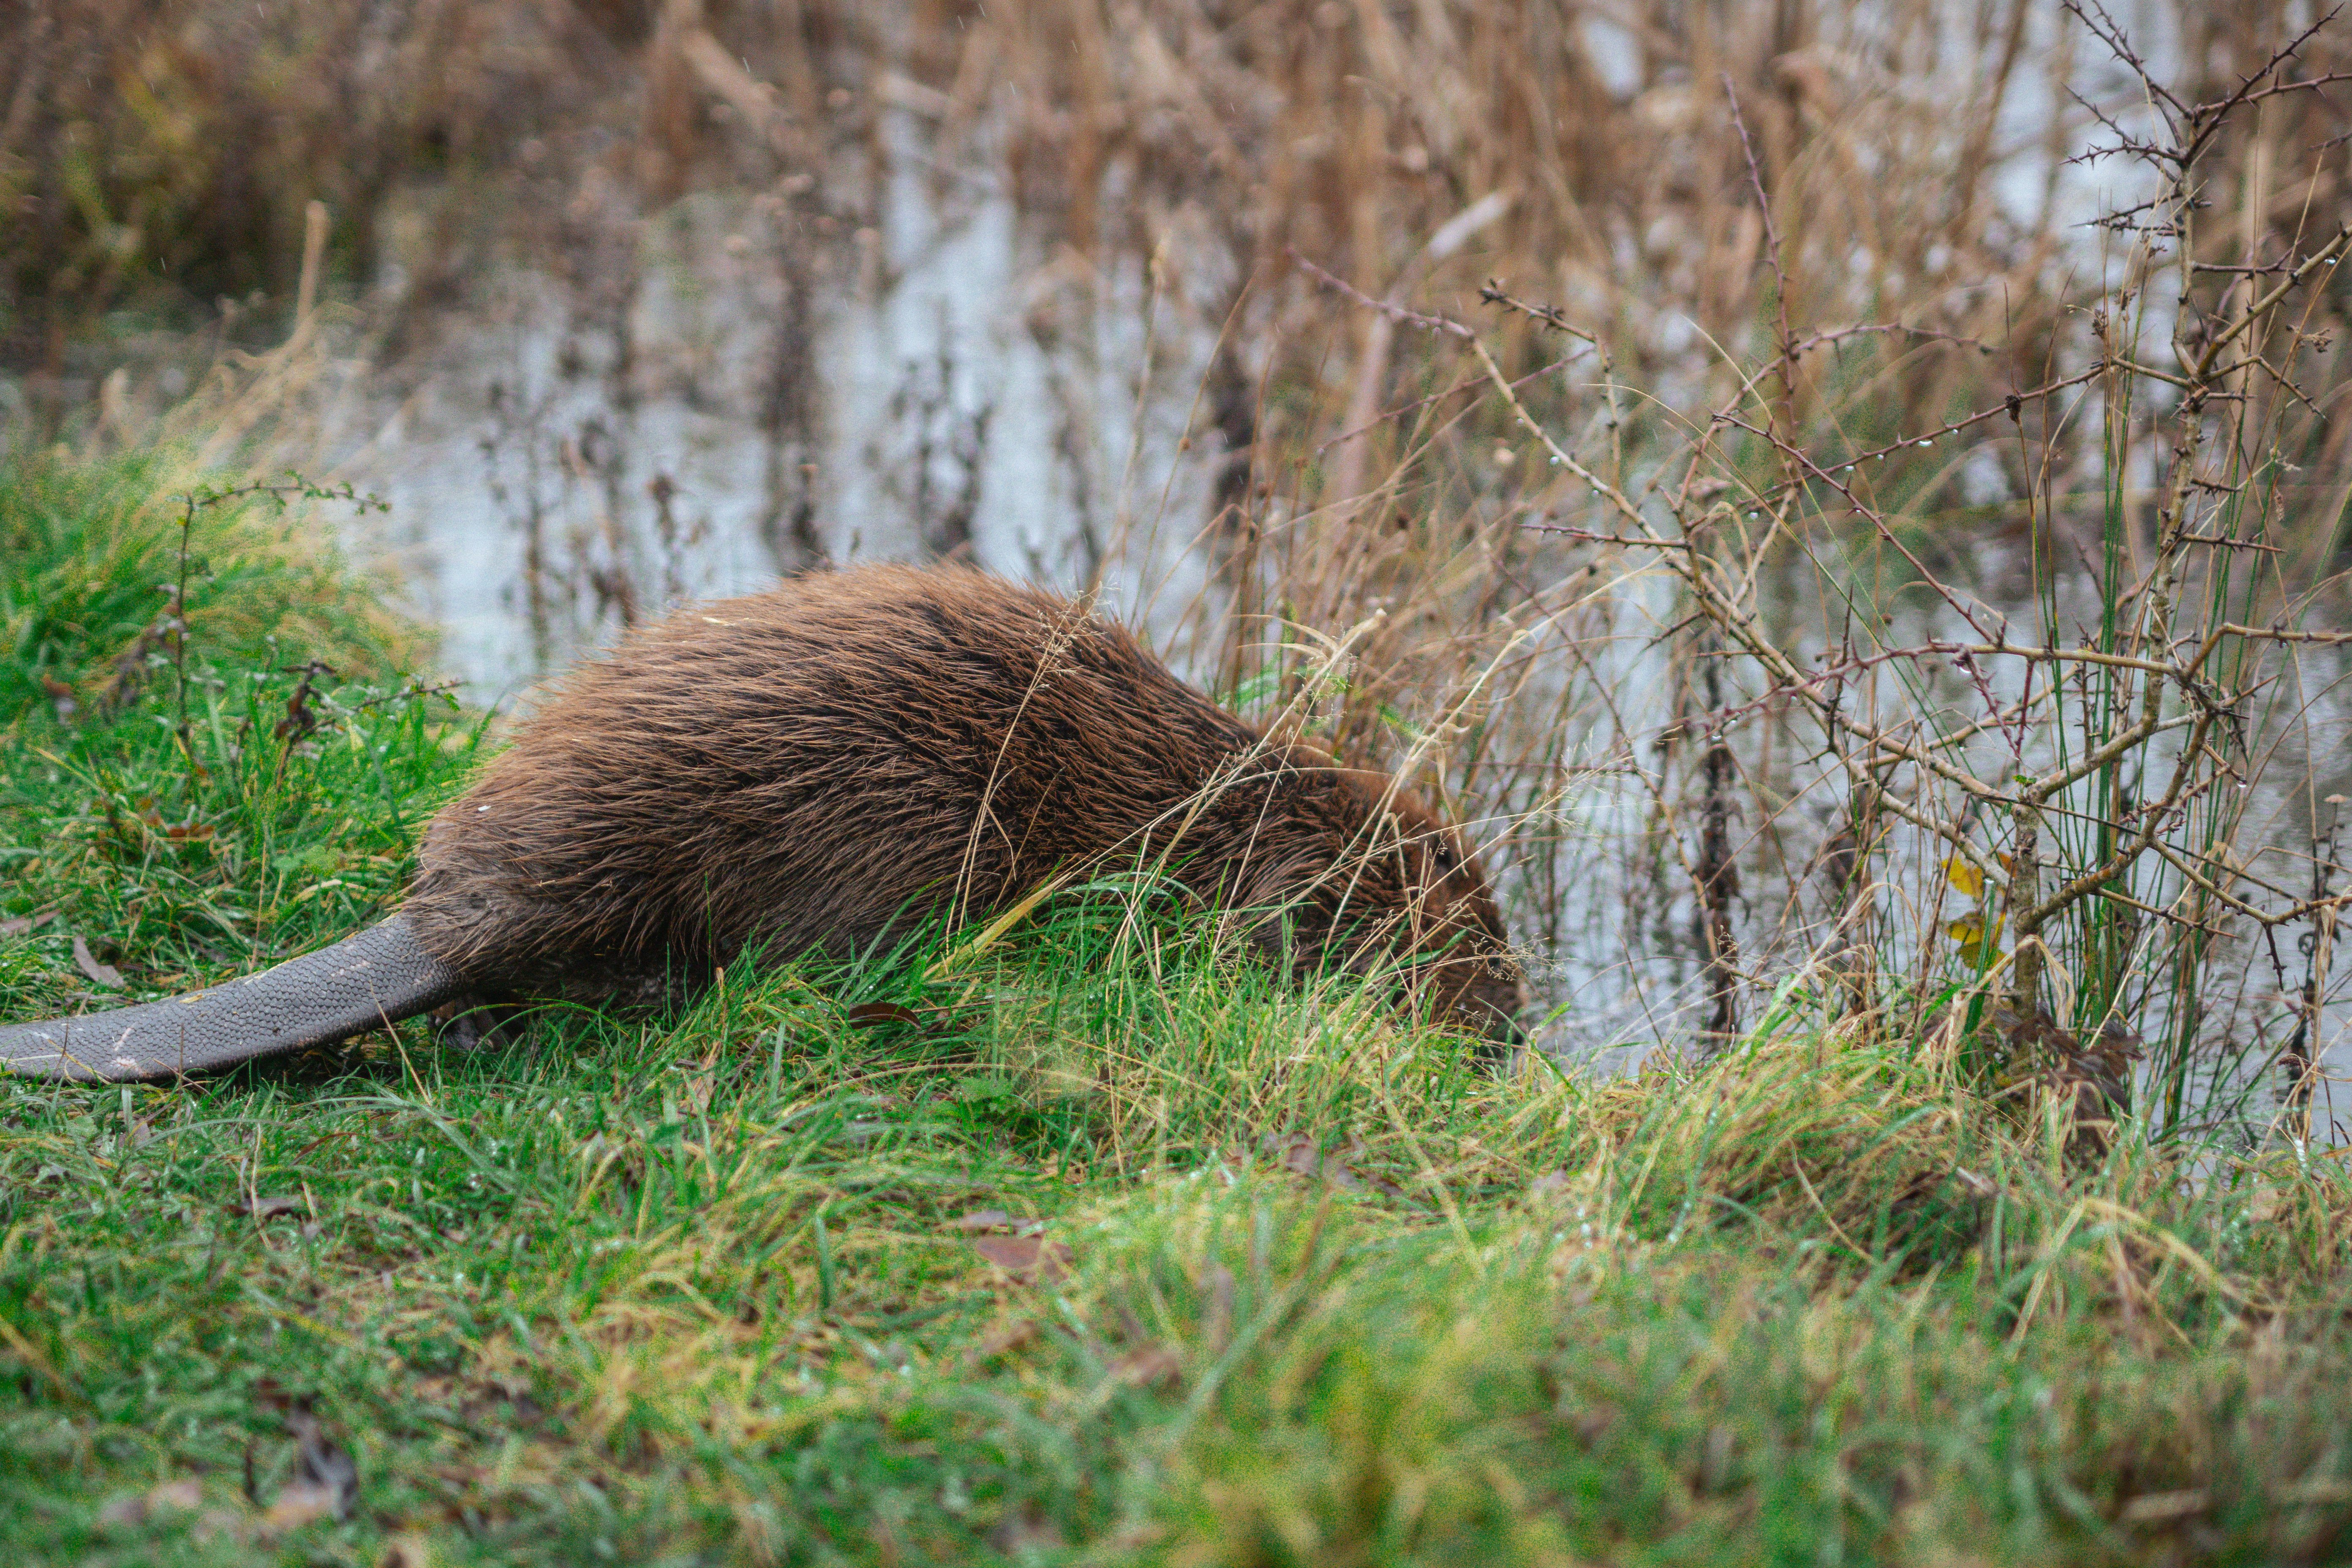 Beaver entering the water